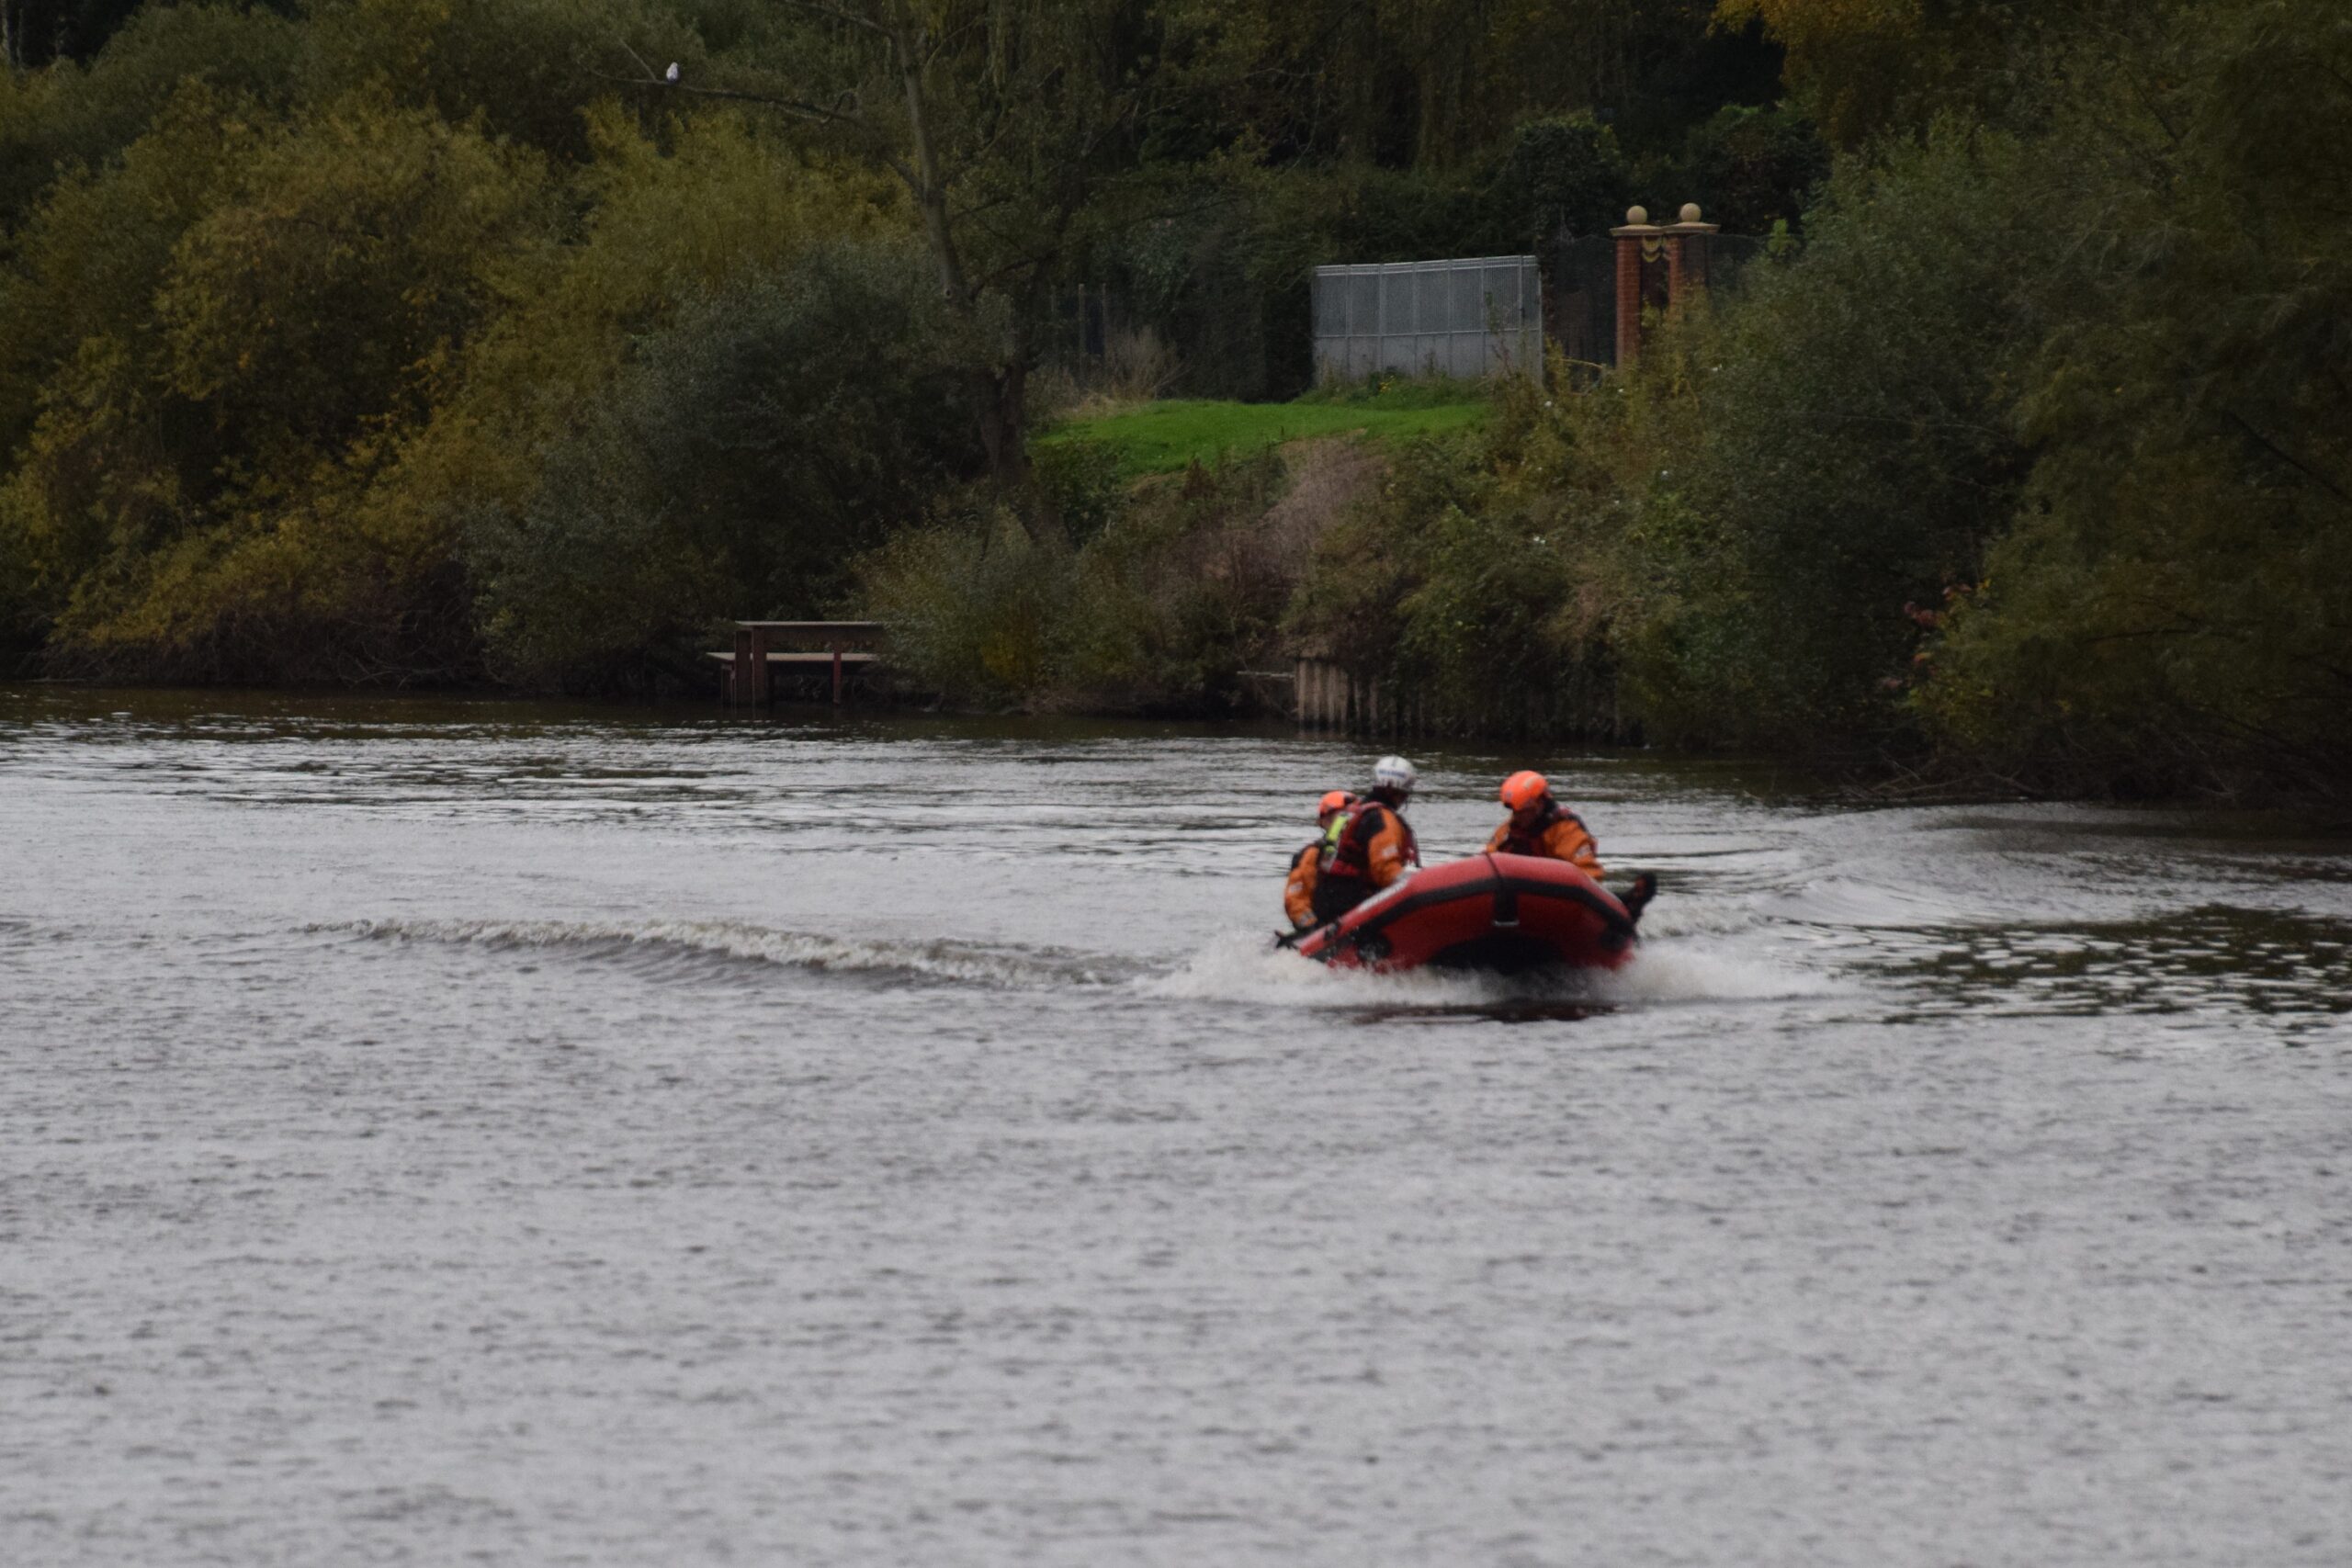 HWFRS backs Drowning Prevention Week to help people stay safe around water